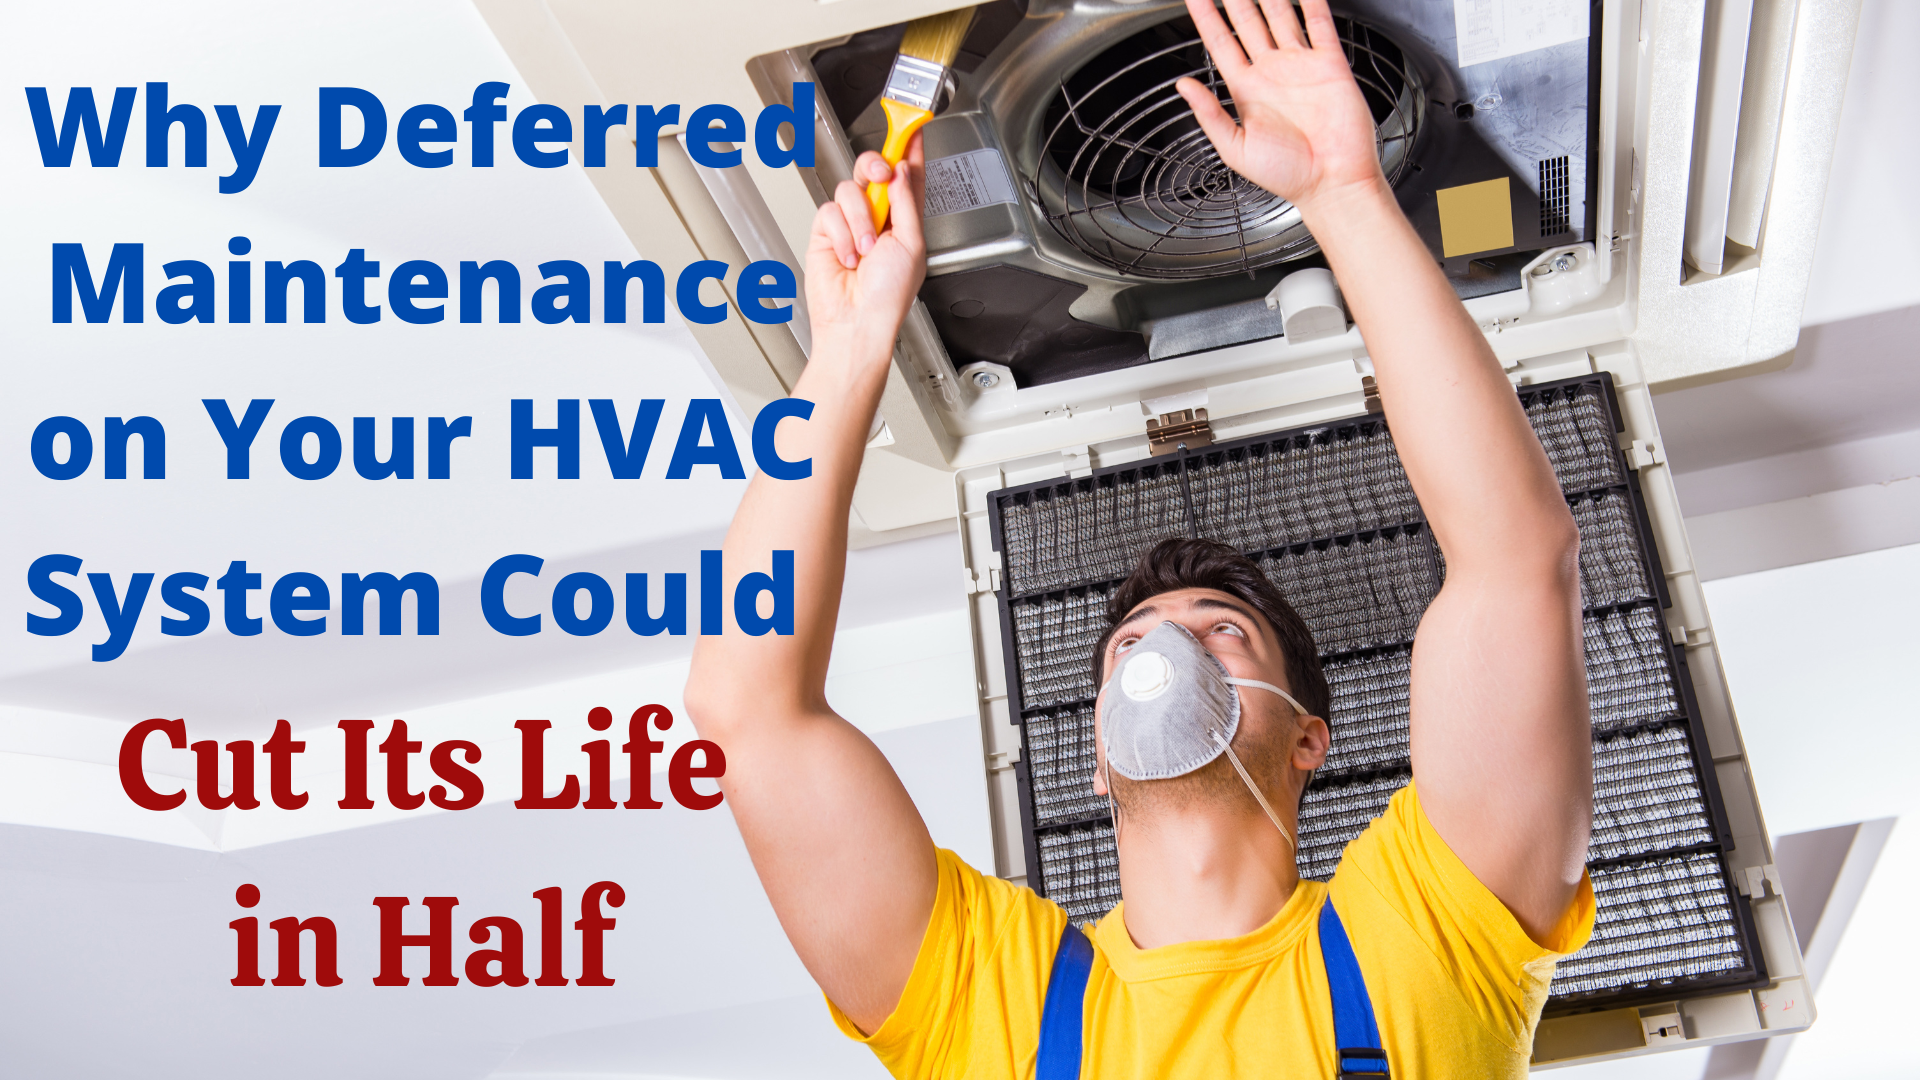 Why Deferred Maintenance Cuts Your HVAC System’s Life in Half